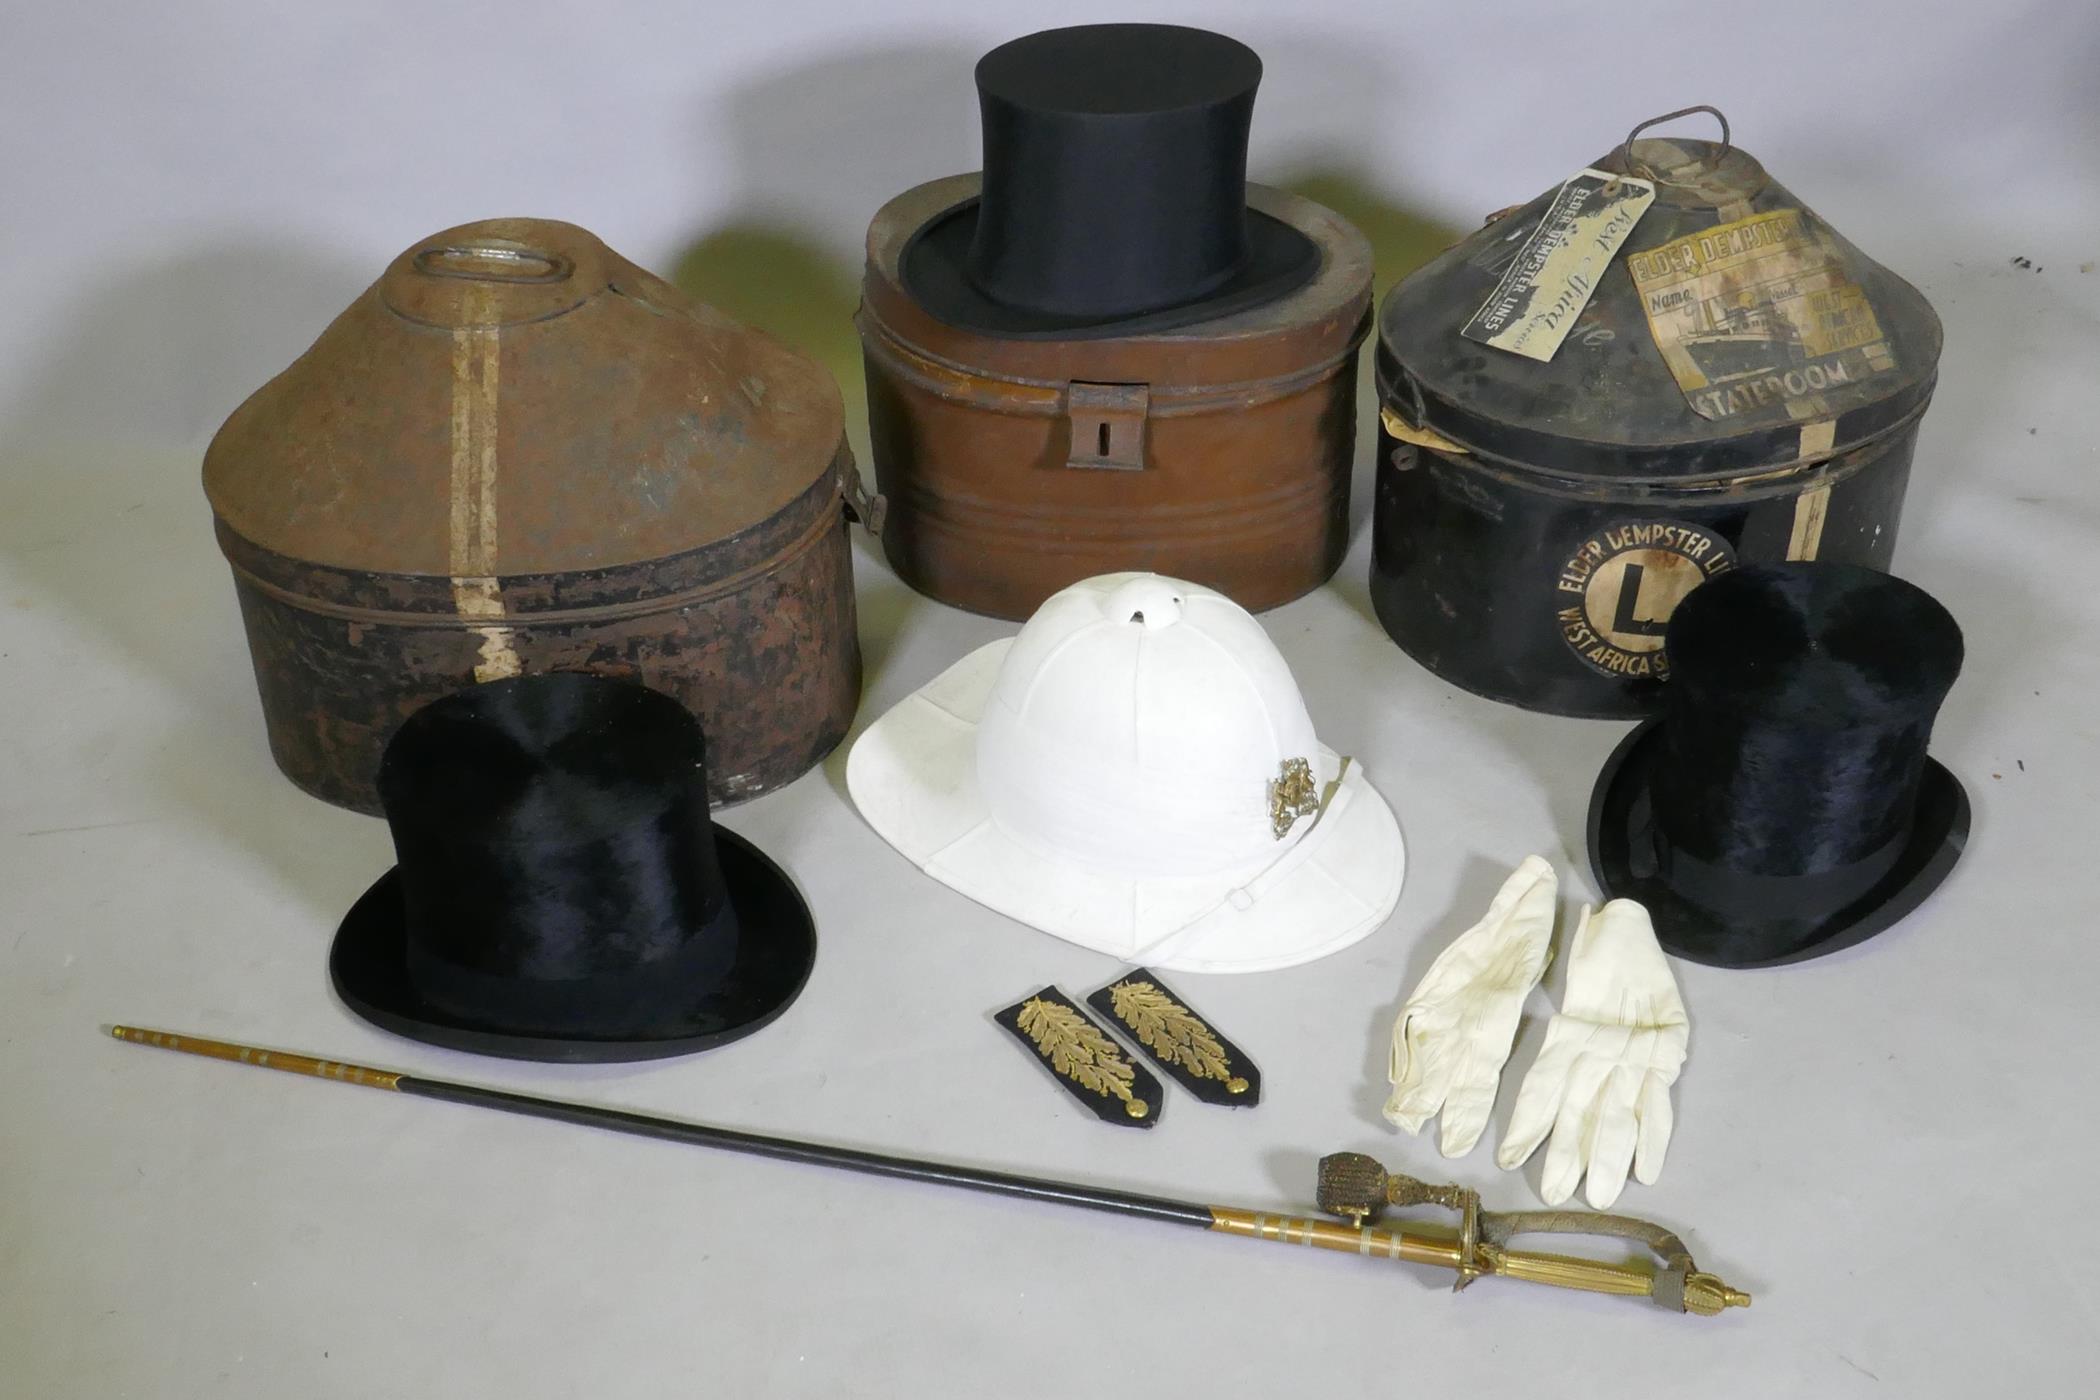 A George V British colonial service diplomatic corps court sword, pith helmet, epaulettes and cap